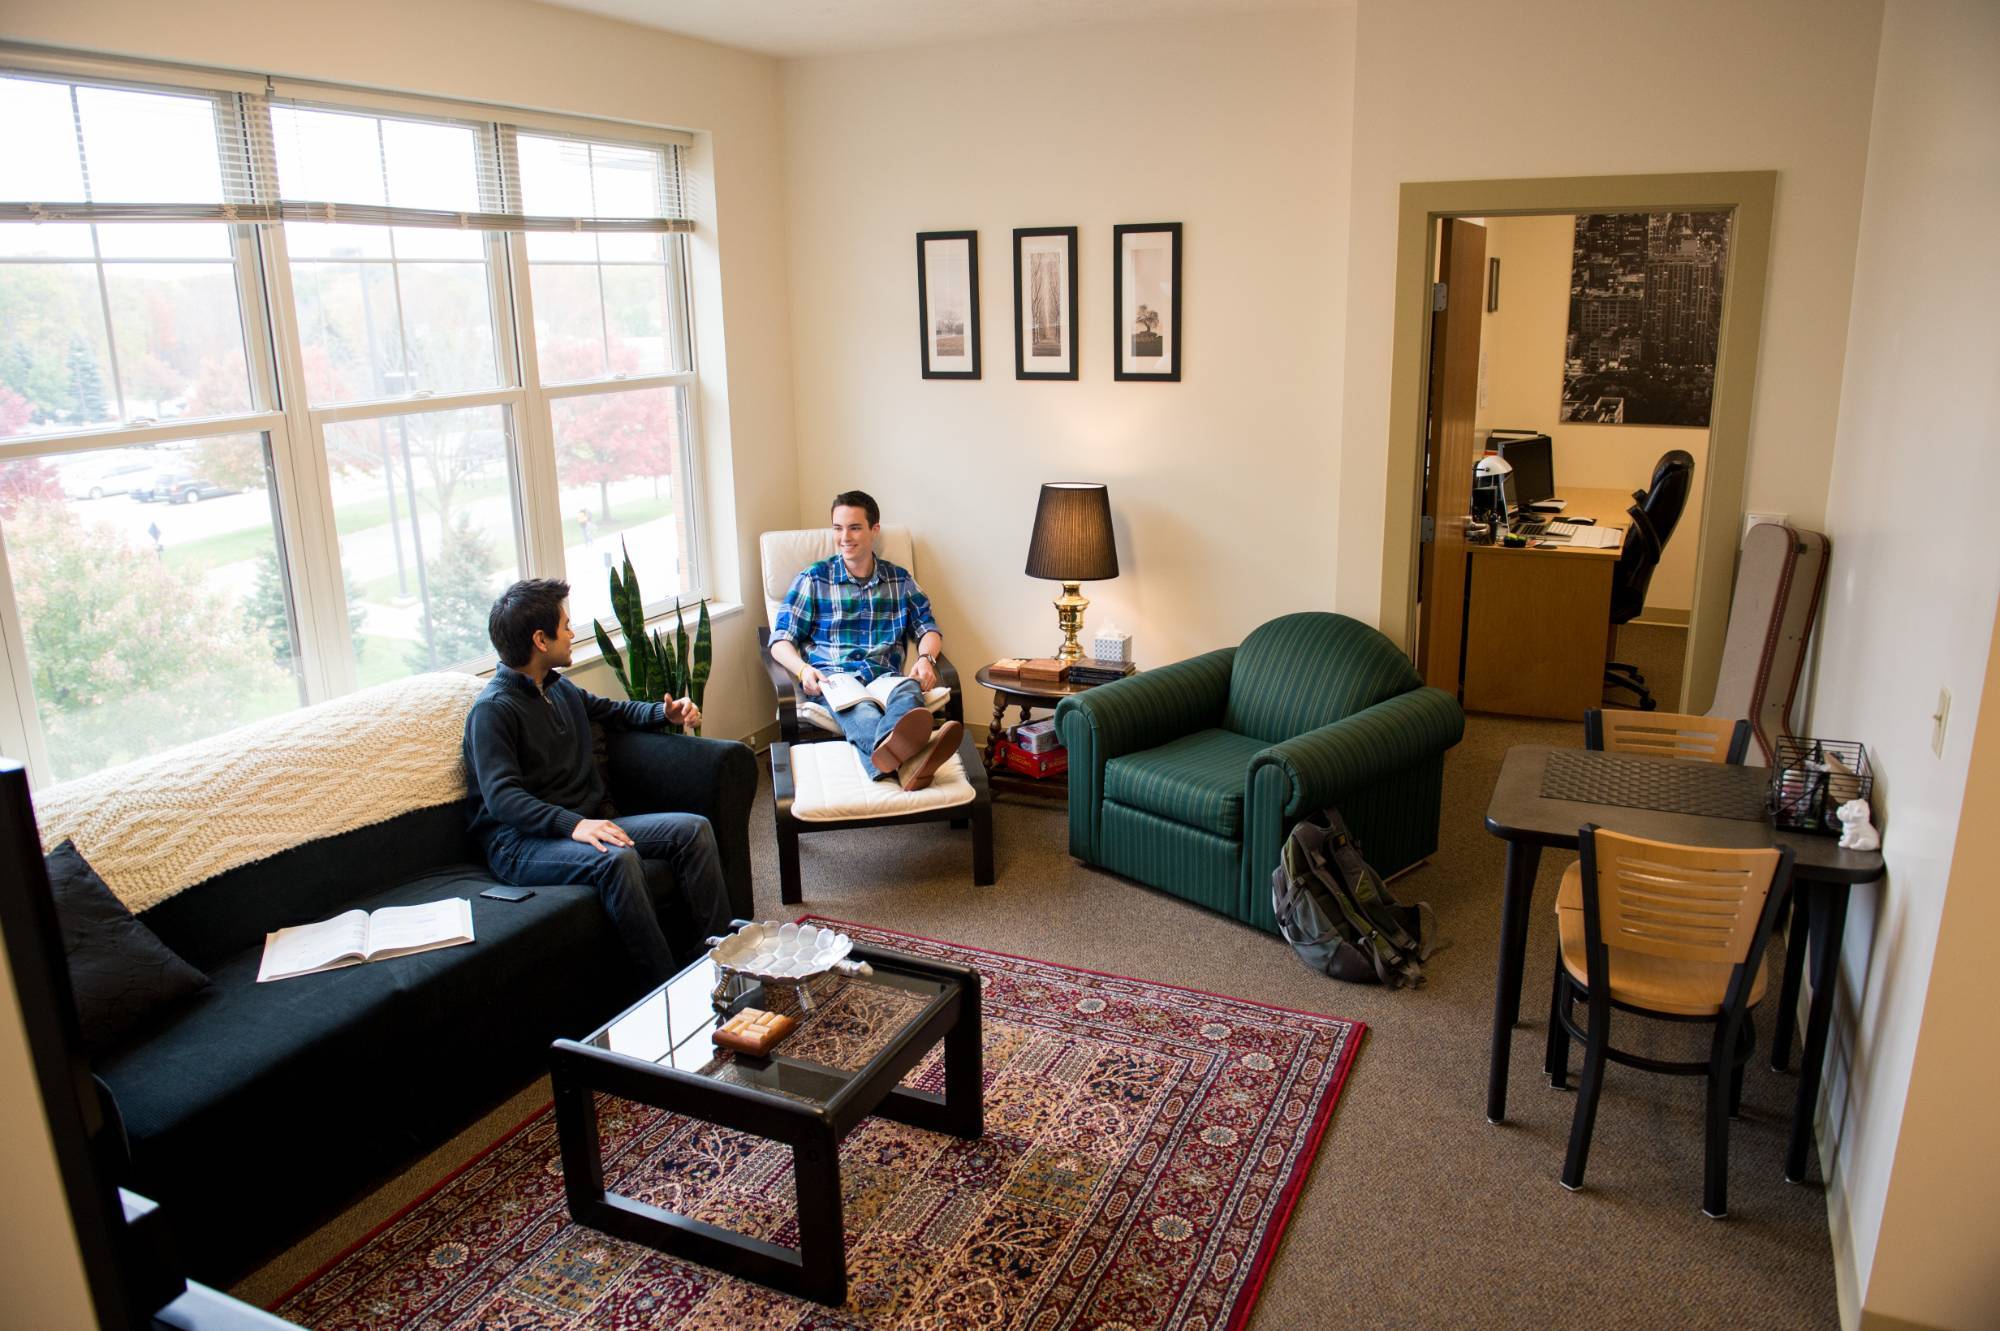 On-campus apartment housing with GVSU students.